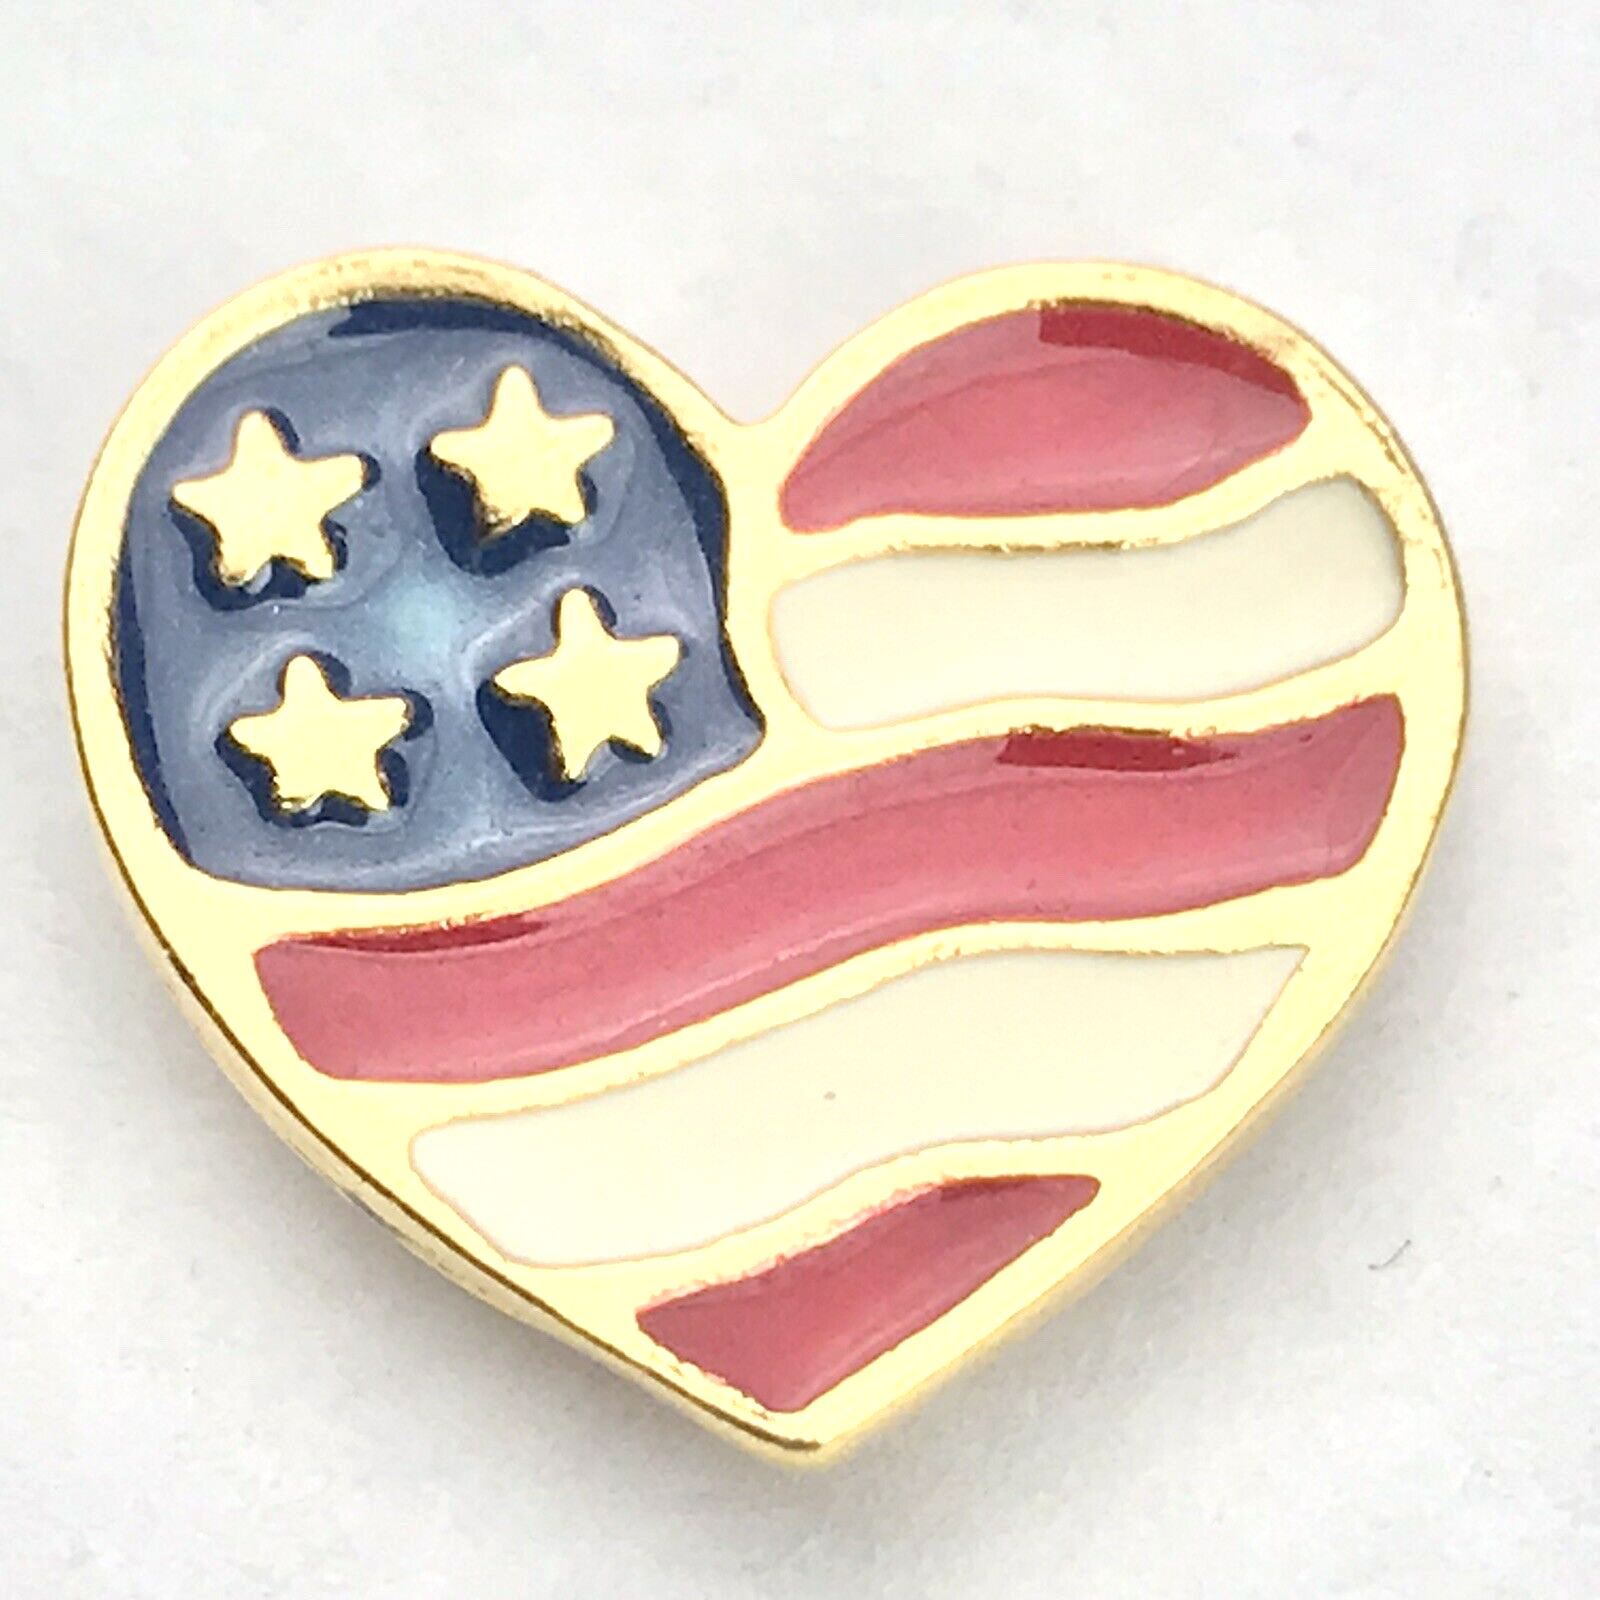 Heart Shaped Made In USA Flag Pin By Avon Gold Tone Enamel 2001 911 - $9.95